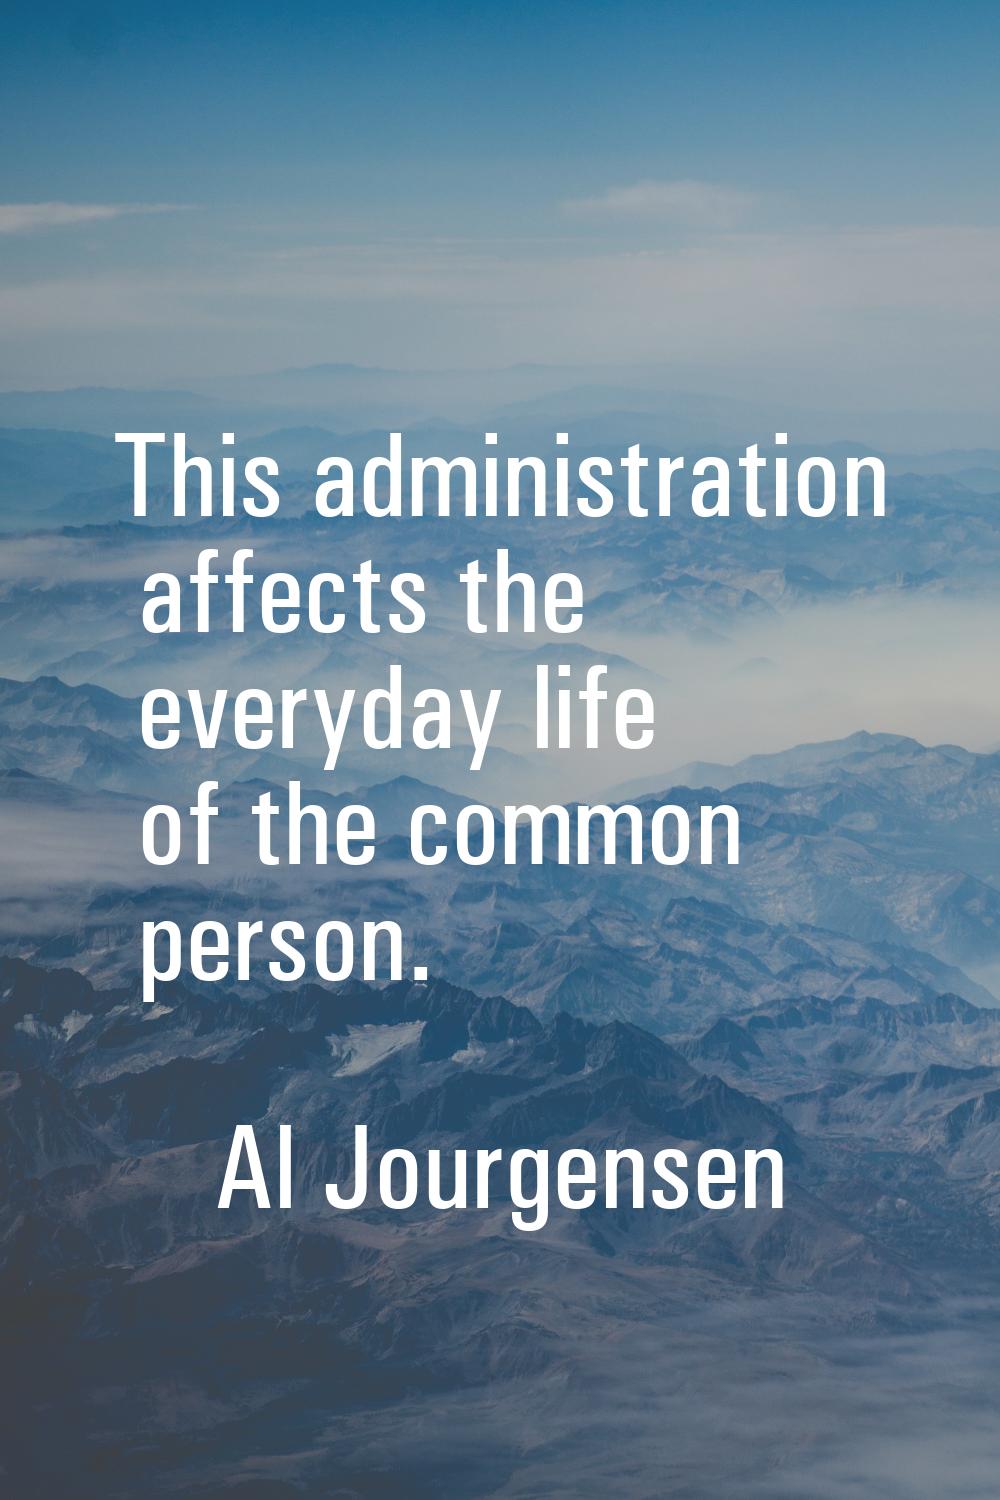 This administration affects the everyday life of the common person.